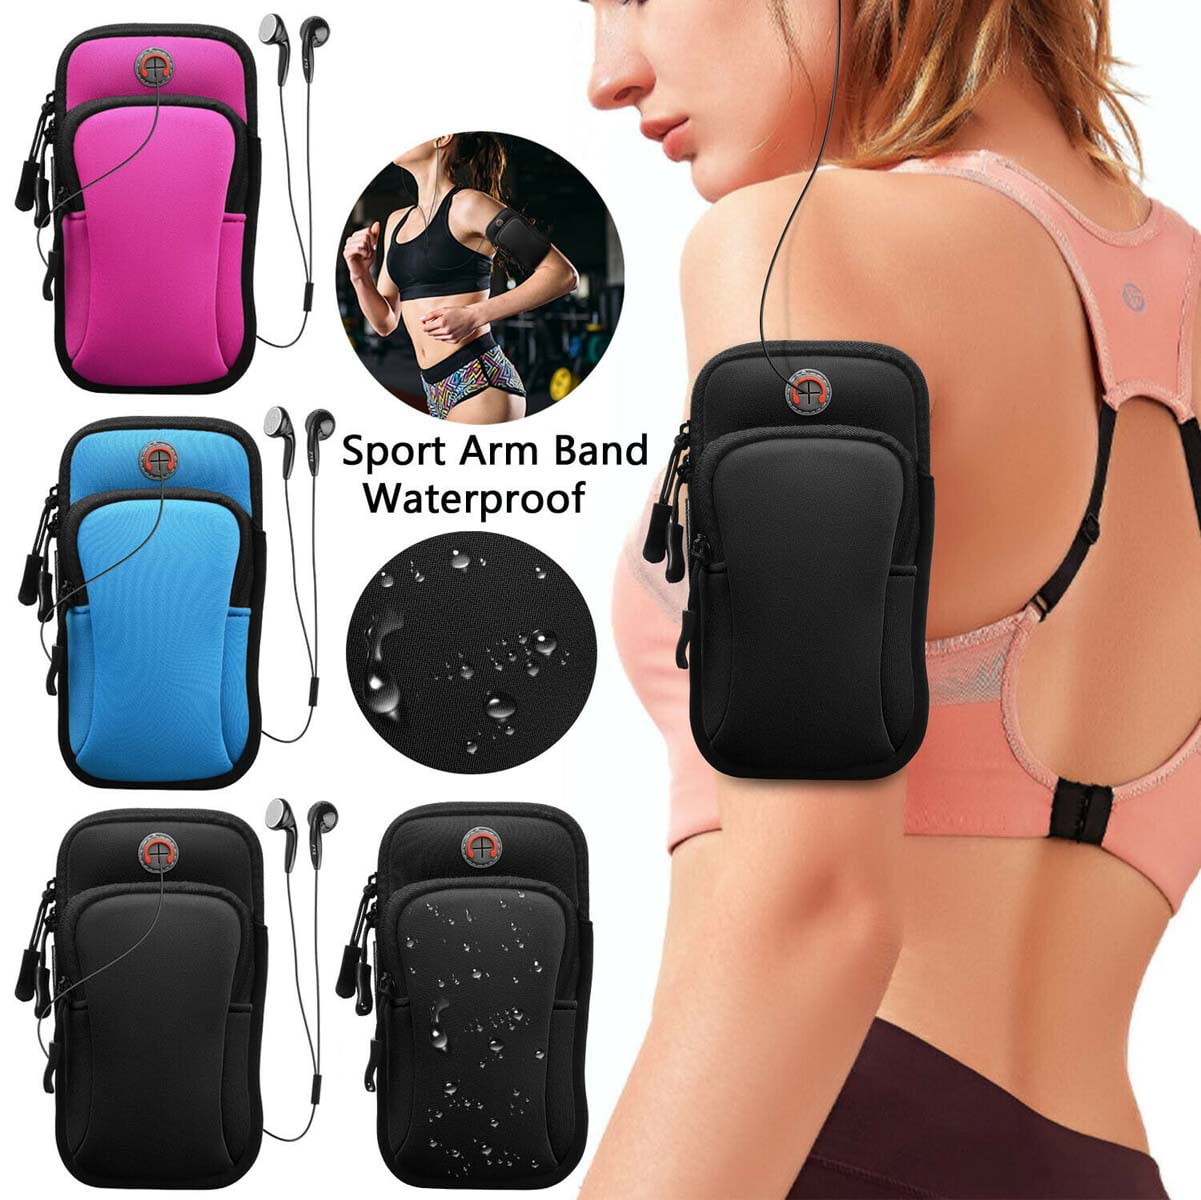 Skin-Friendly Sweat-proof Multifunctional Outdoor Sports Gym Armband for Mobile phone up to 6.2 with Headphone Slot and Double Pockets Vetoo Running Phone Armband